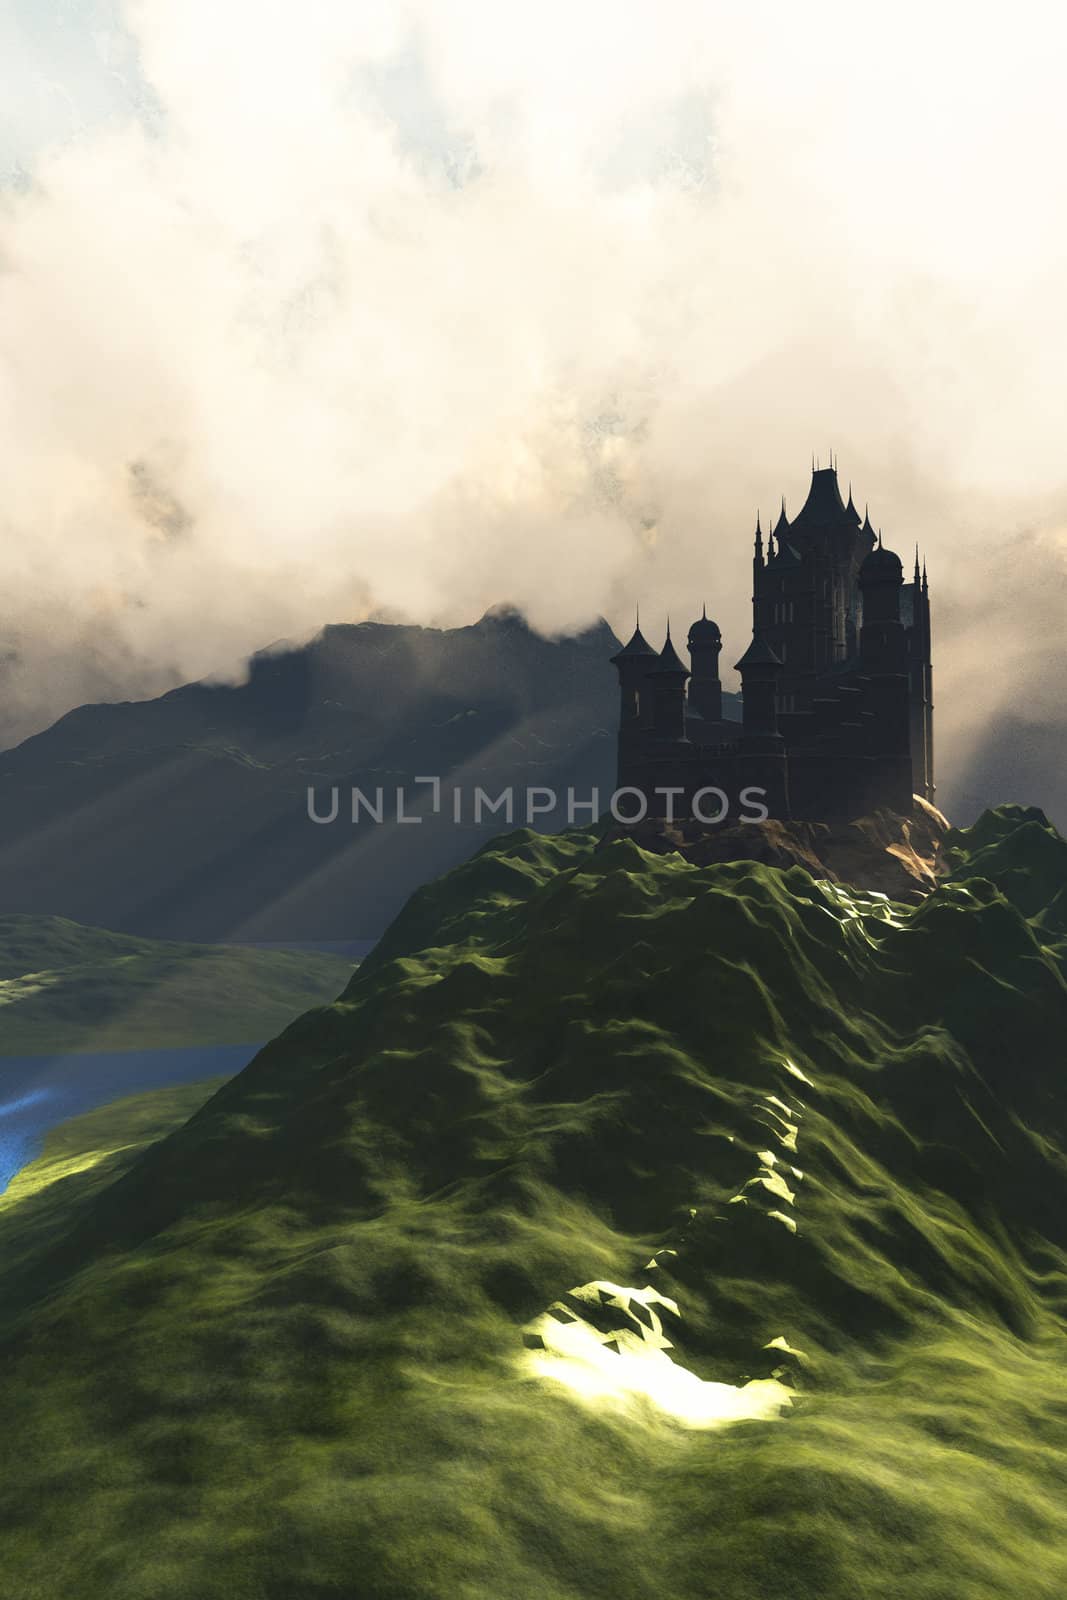 A beautiful castle sits on the top of a hill overlooking a lush green river valley.